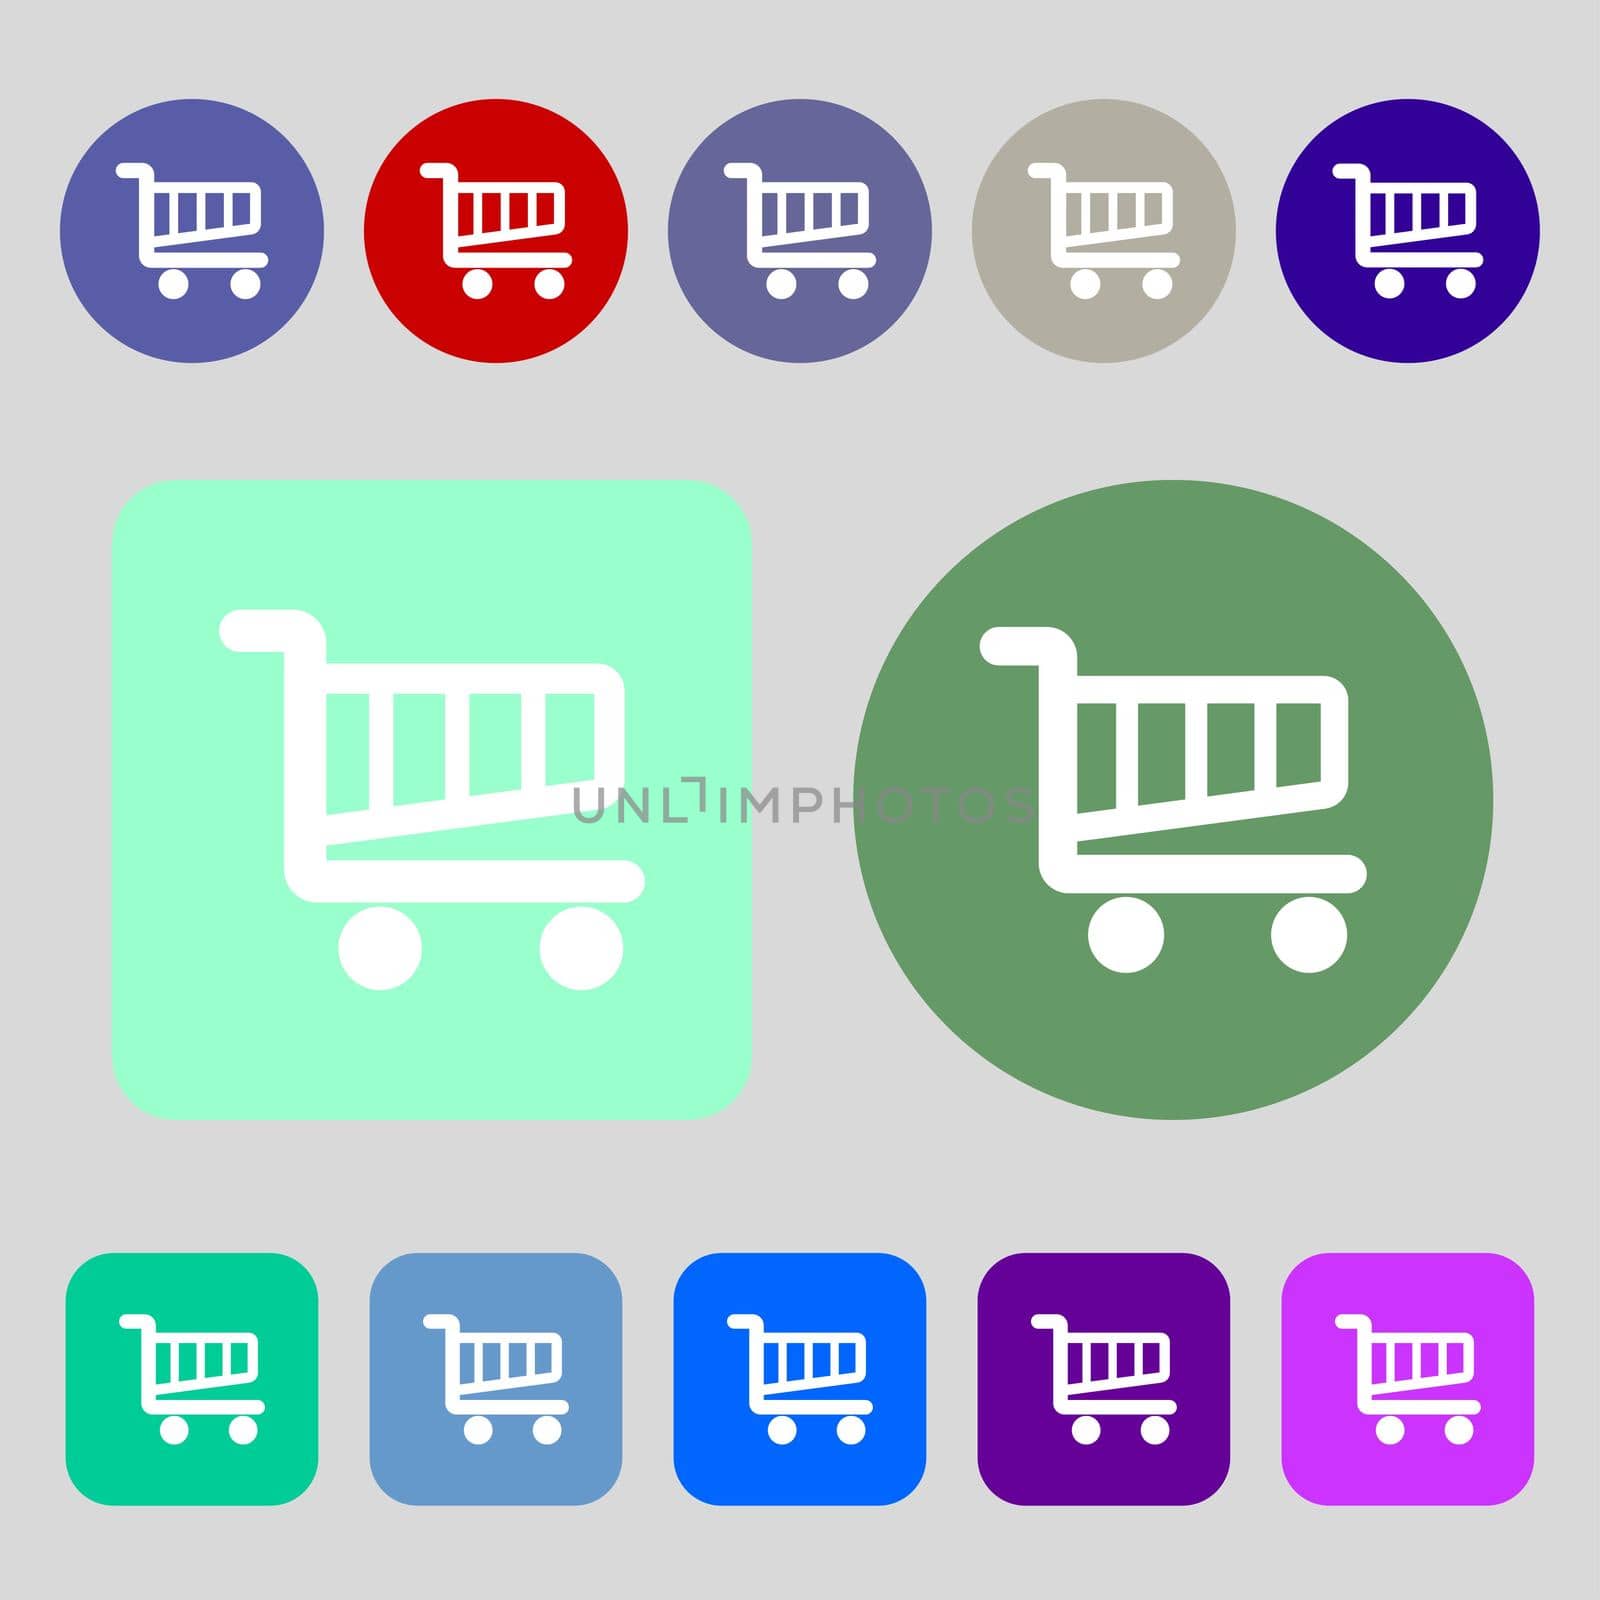 Shopping Cart sign icon. Online buying button.12 colored buttons. Flat design. illustration